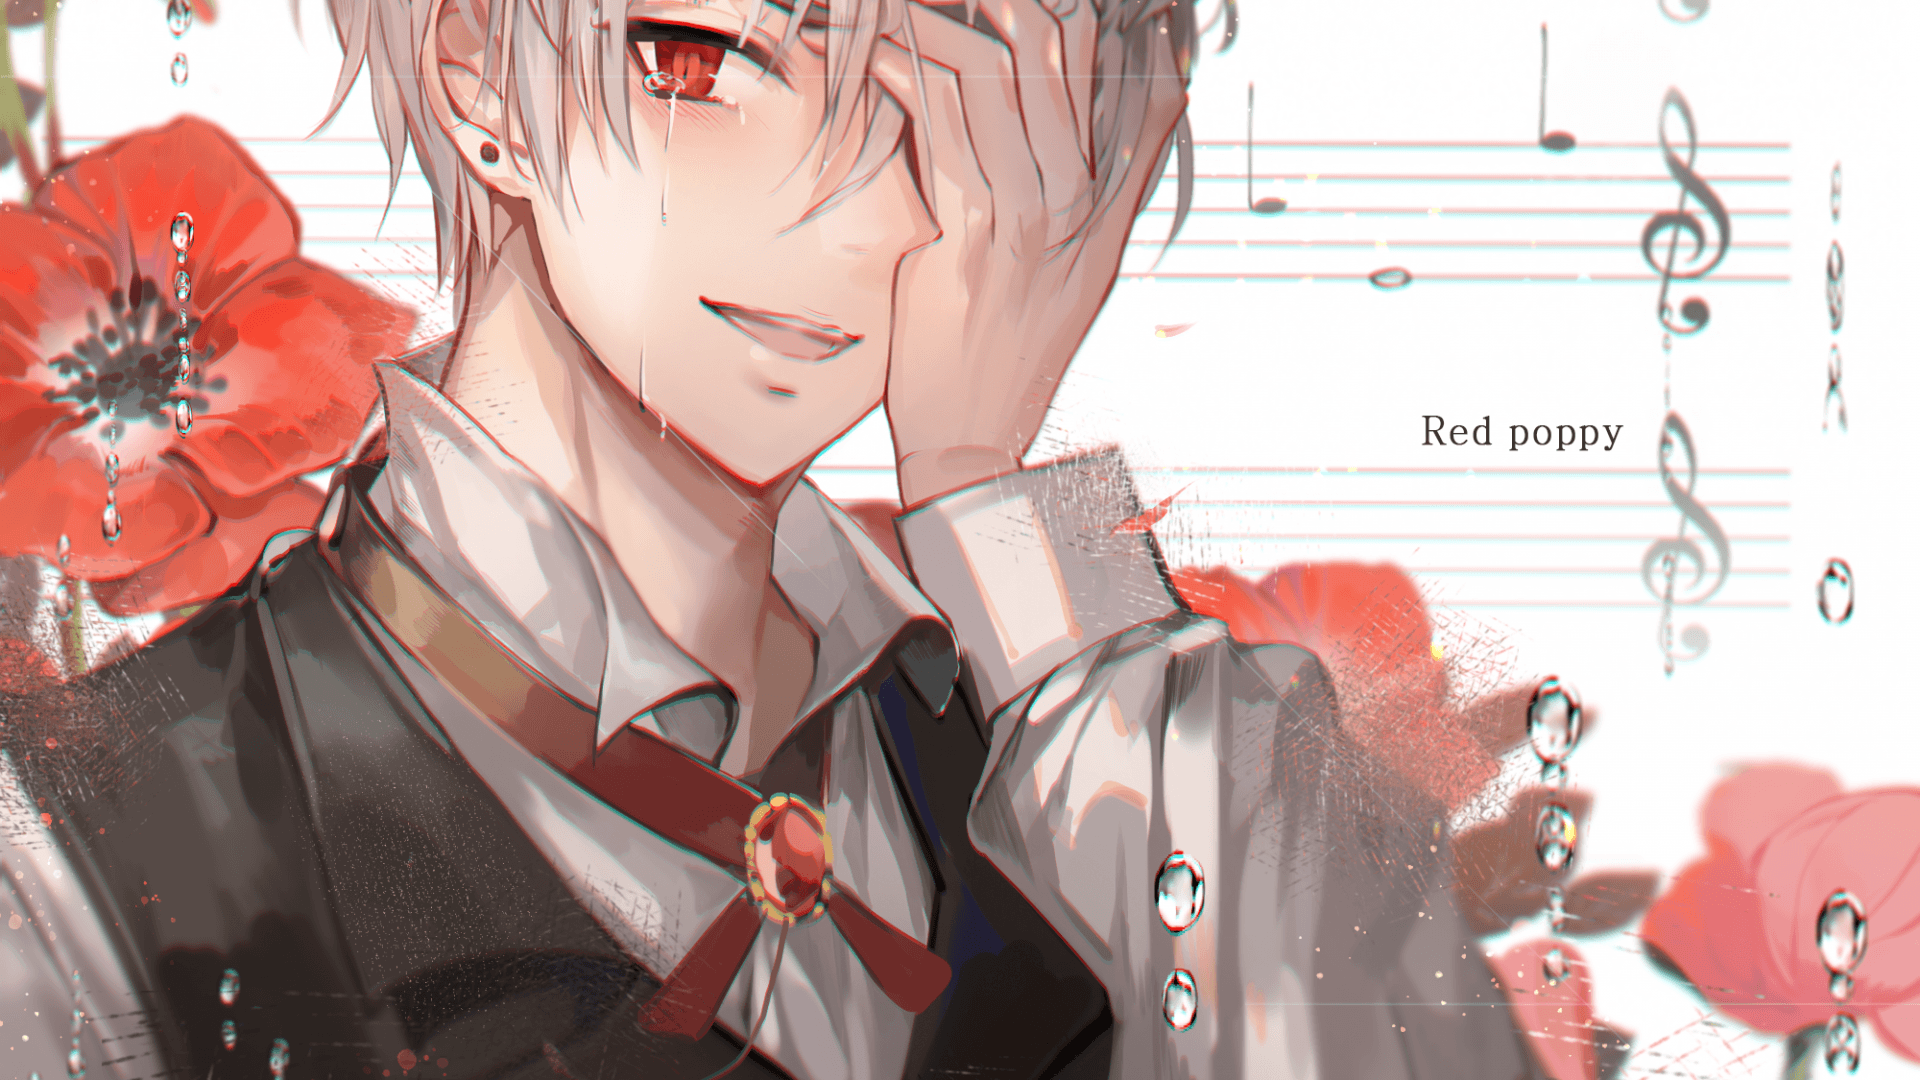 Smile Cry Anime Boy Wallpapers - Wallpaper Cave